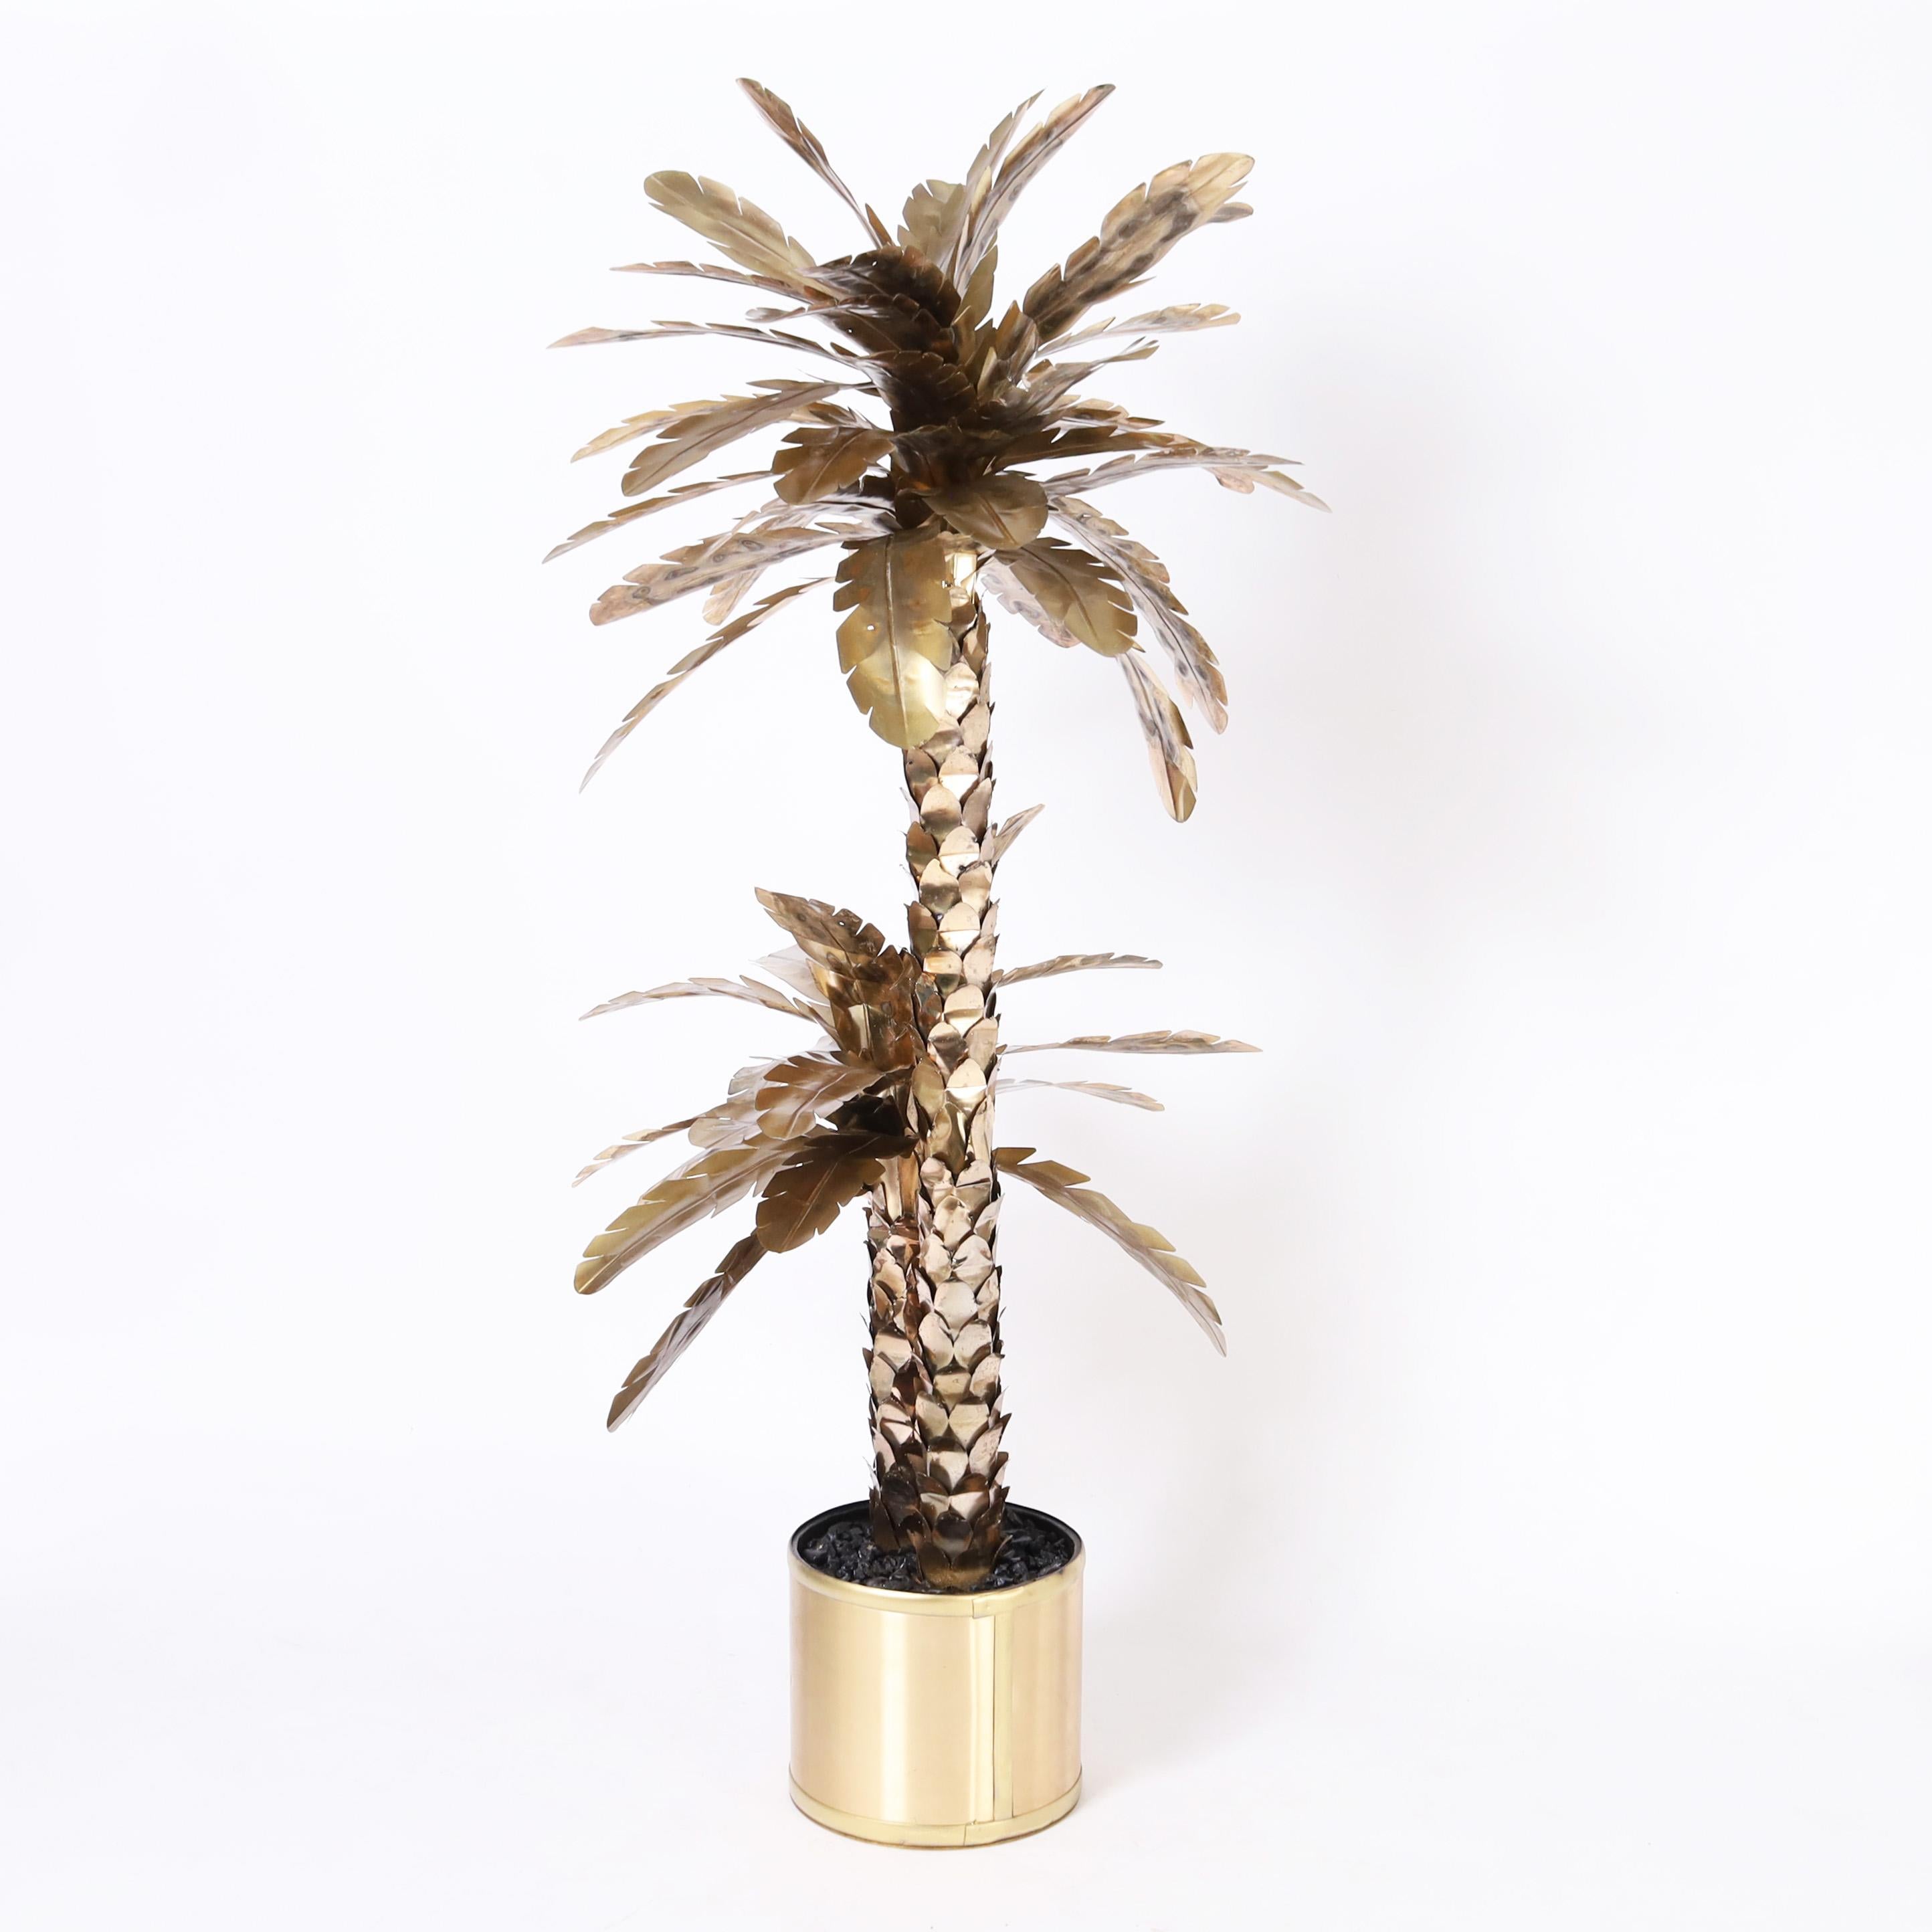 Chic Large scale vintage palmetto palm tree sculpture crafted in metal having a 